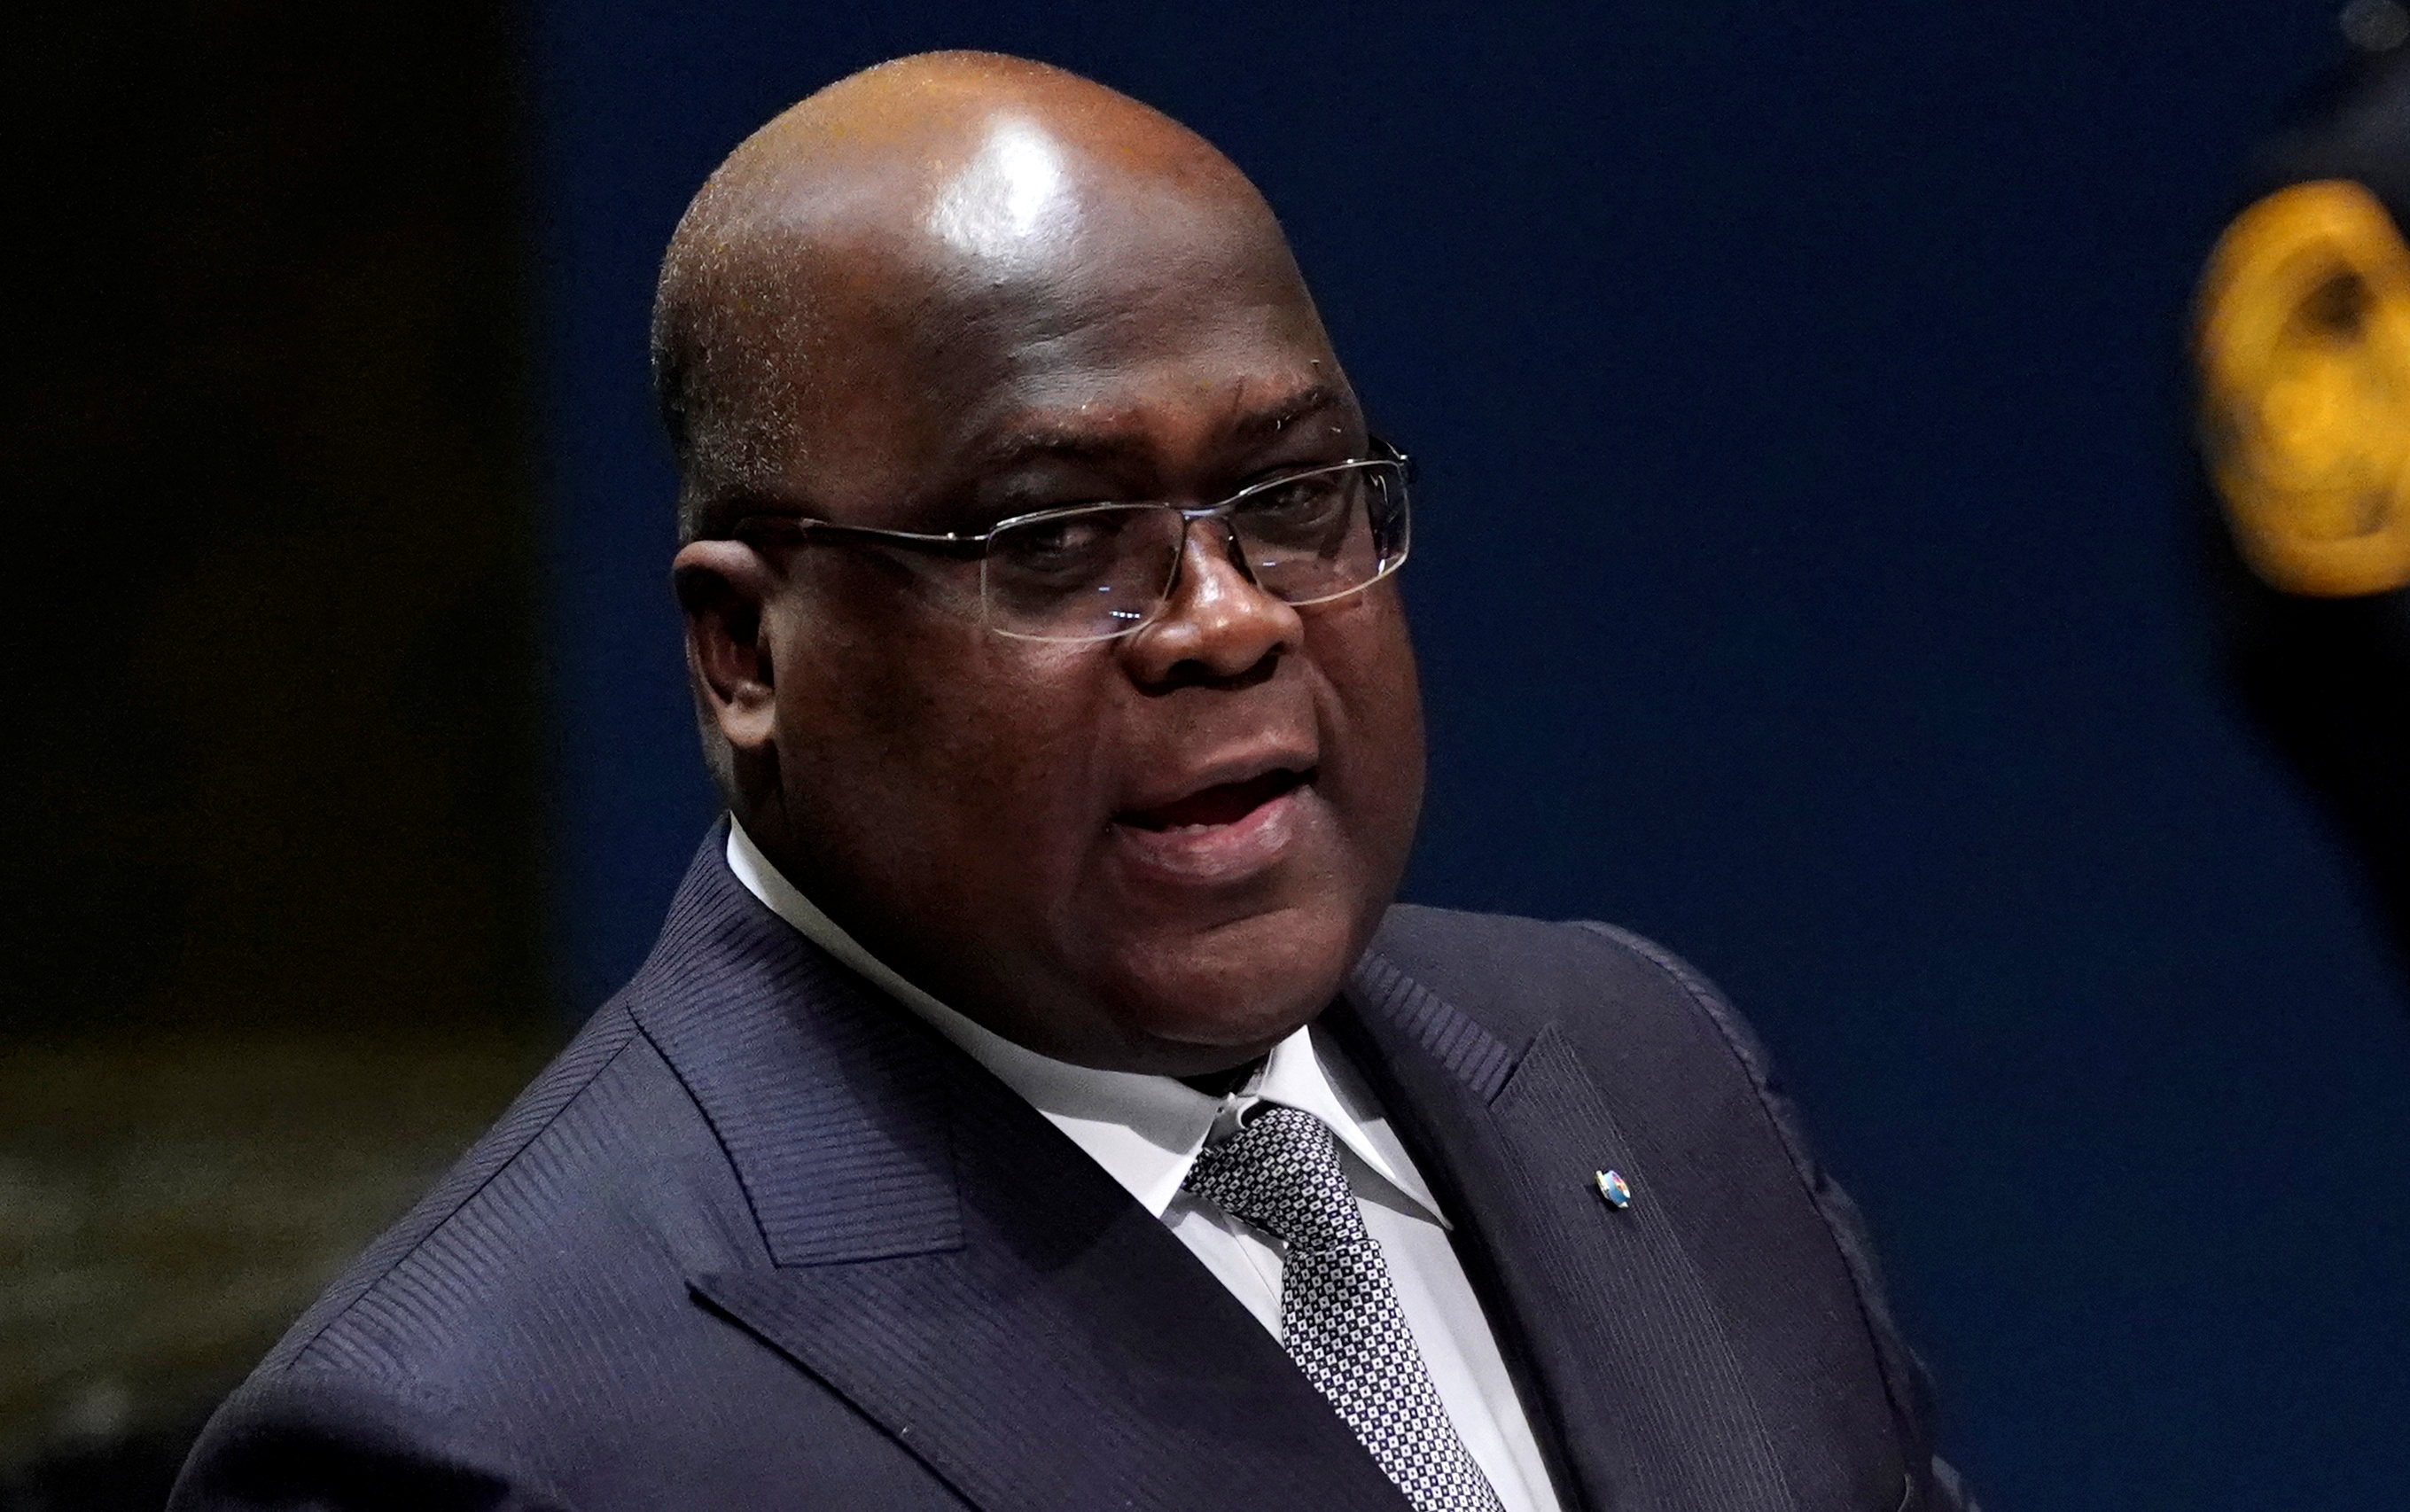 Congo's President Felix Antoine Tshilombo Tshisekedi addresses the 74th session of the United Nations General Assembly at U.N. headquarters in New York City, New York, U.S., September 26, 2019. REUTERS/Carlo Allegri/File Photo